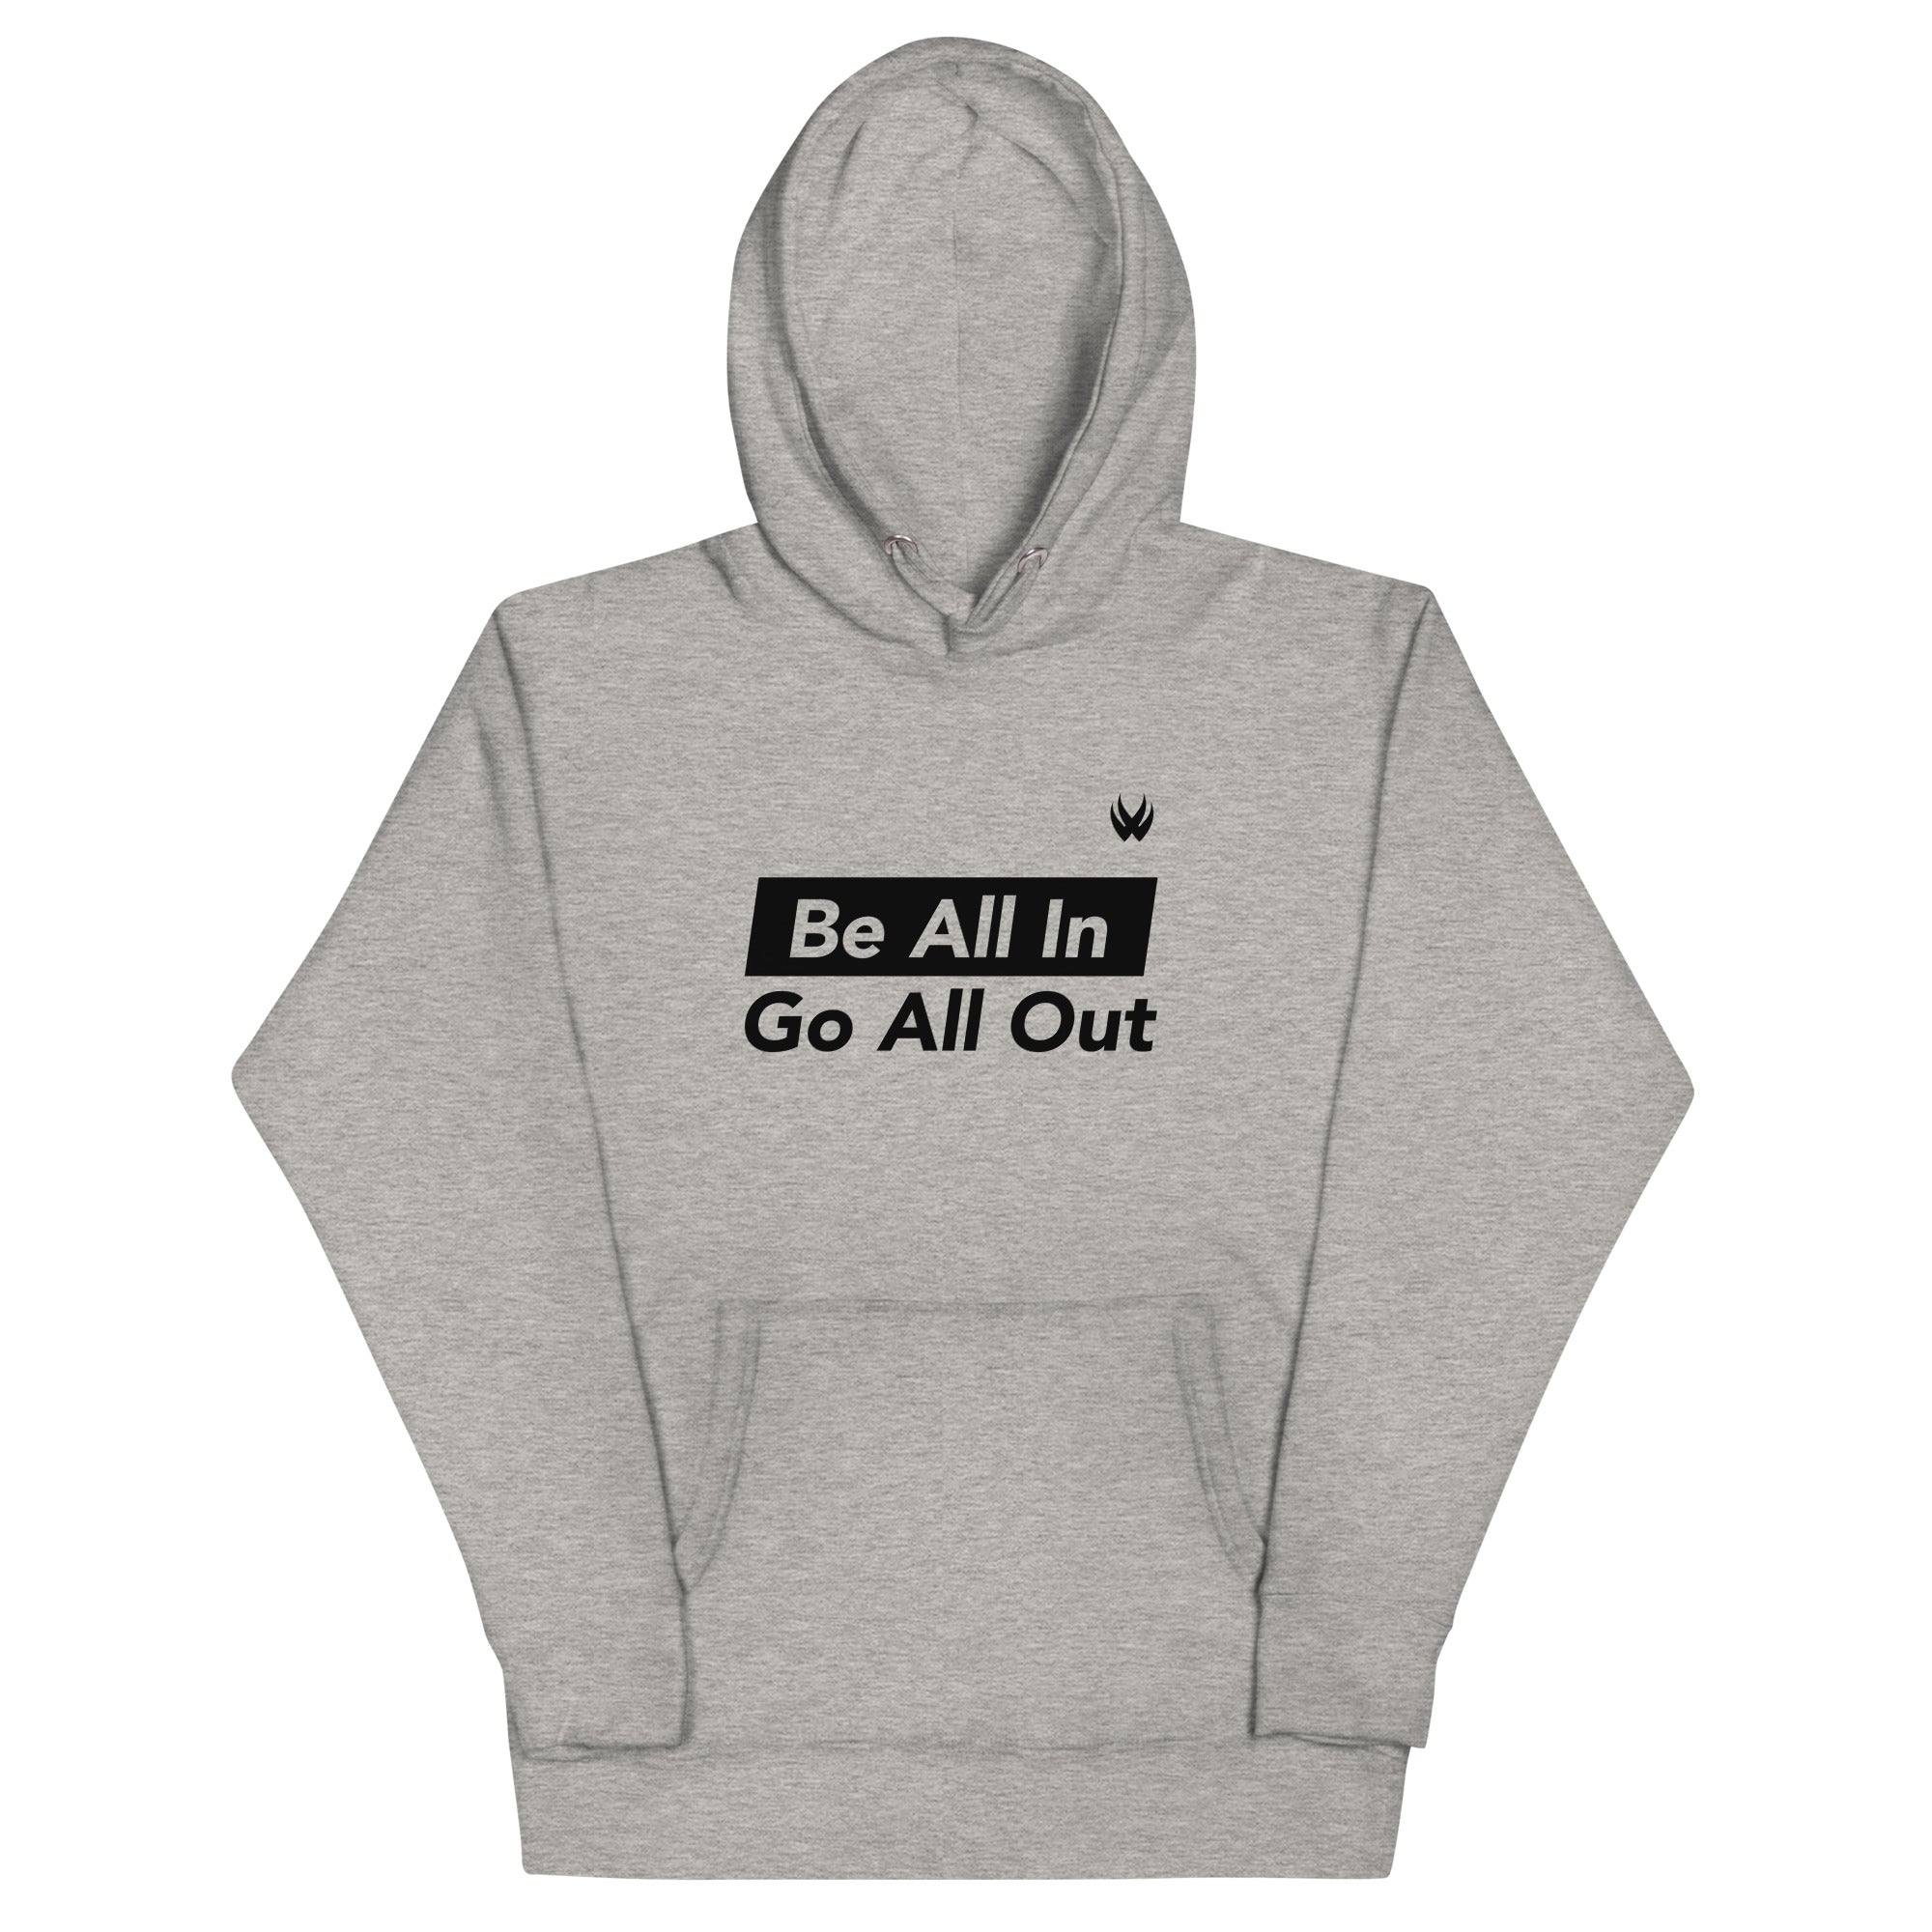 Women's Be All In, Go All Out Hoodie - Victor Wear